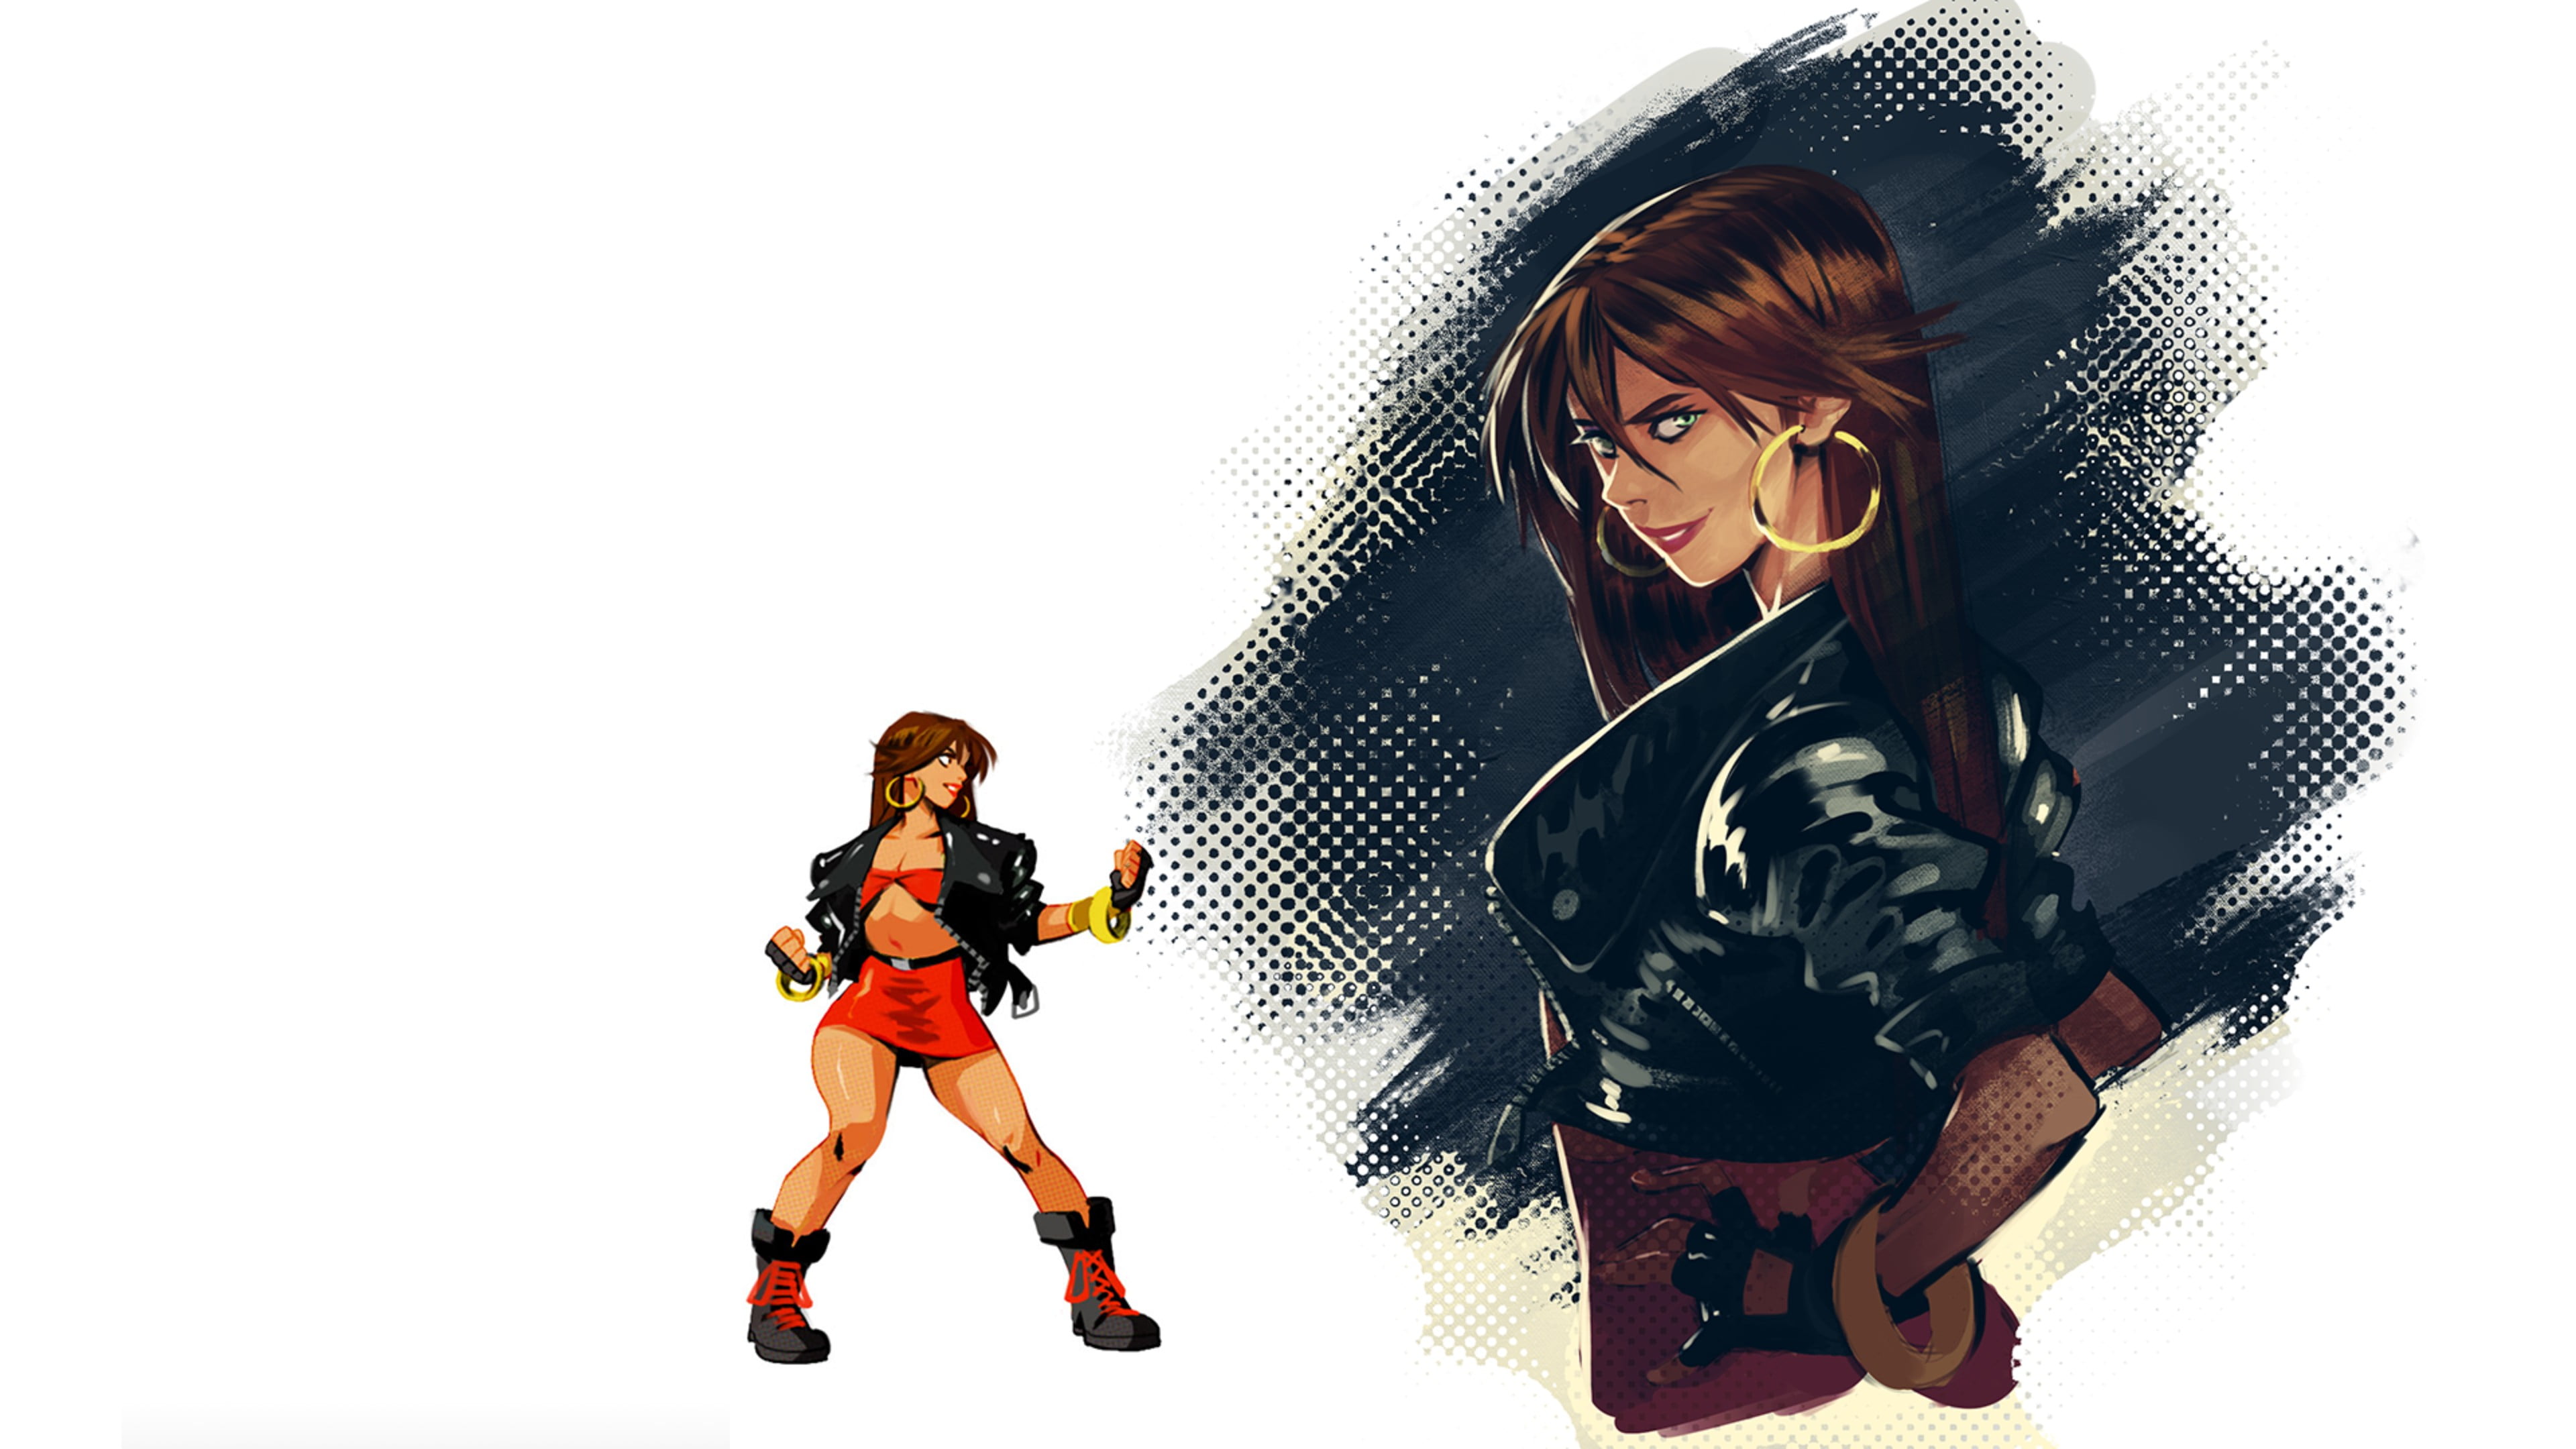 Streets of Rage 4, video game art, illustration, white background